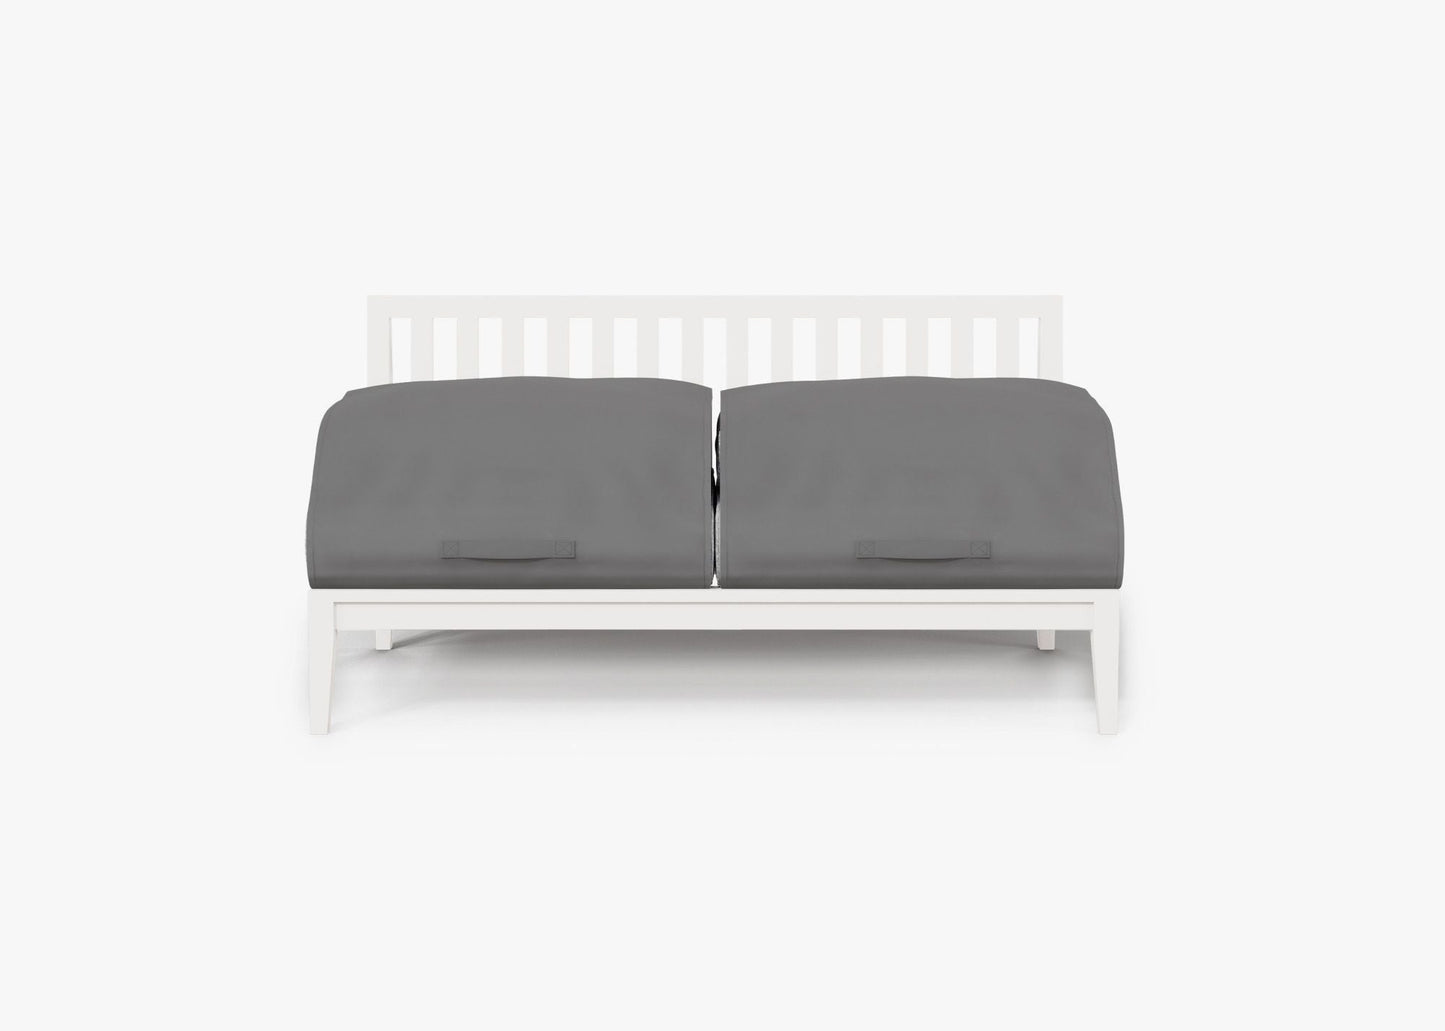 Live Outer 58" White Aluminum Outdoor Armless Loveseat With Pacific Fog Gray Cushion